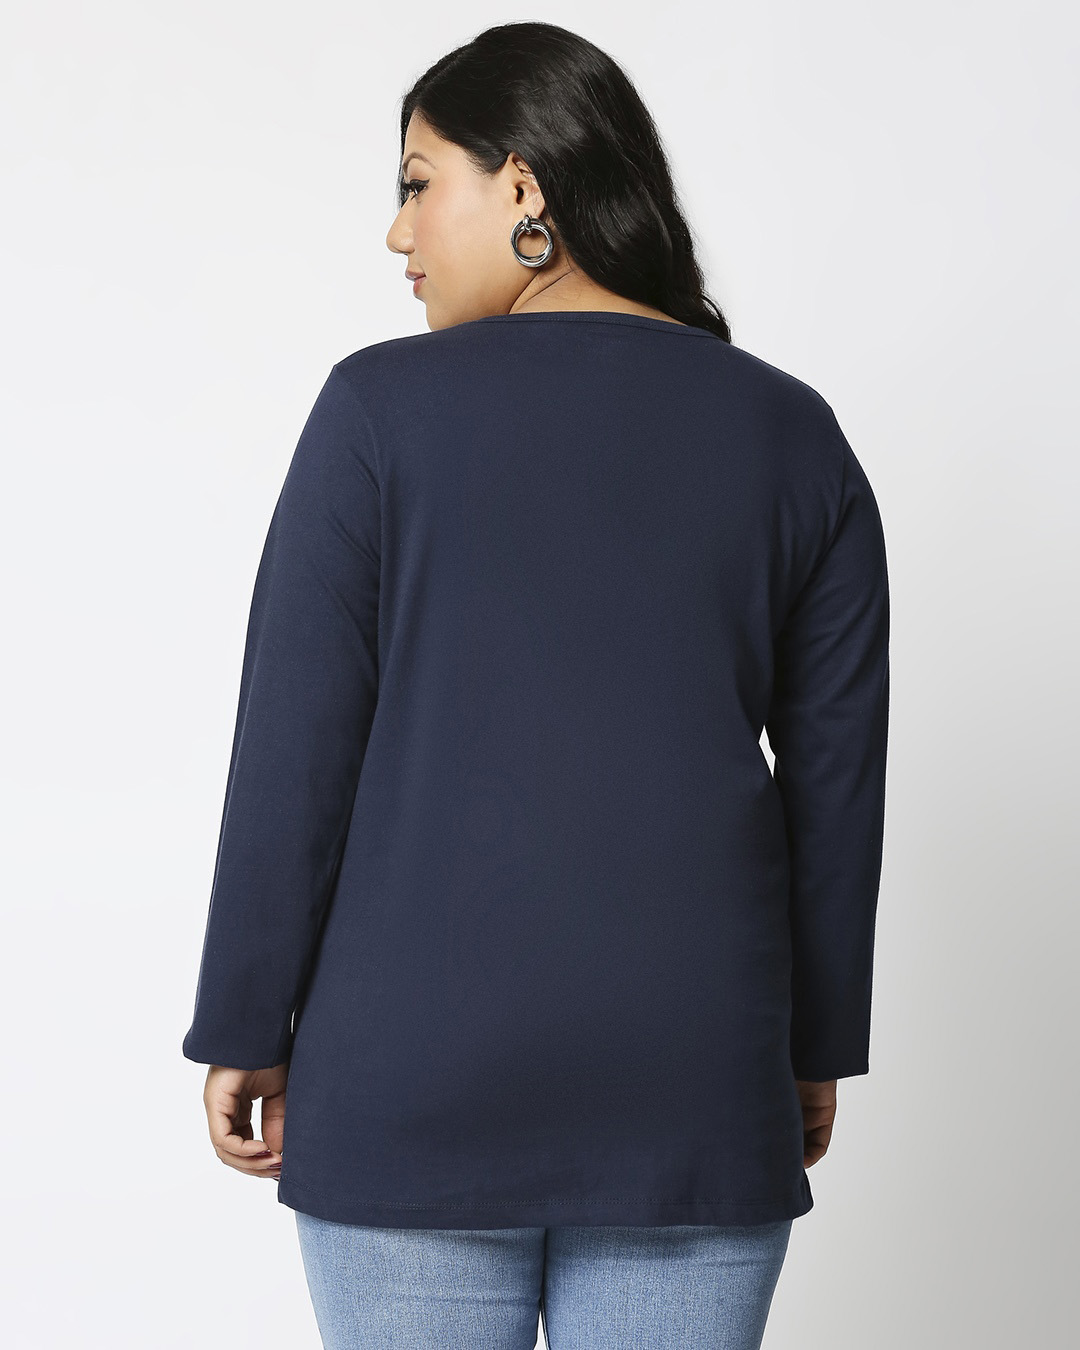 Shop Happiness Plus Size Colorful Full Sleeves T-Shirt-Back